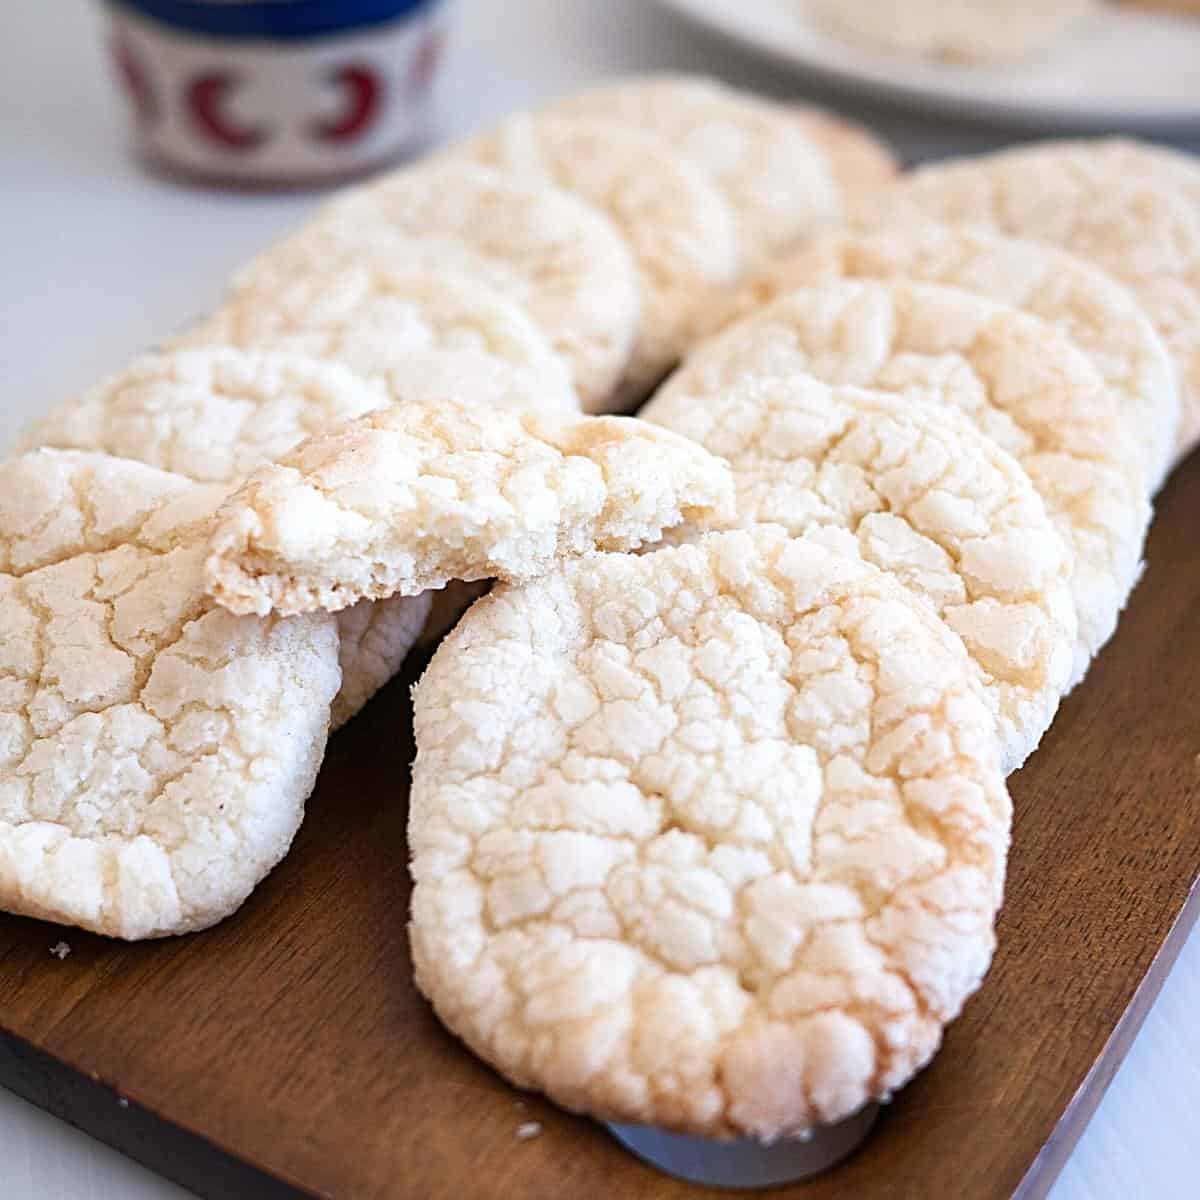 Crinkle cookies on a wooden board.